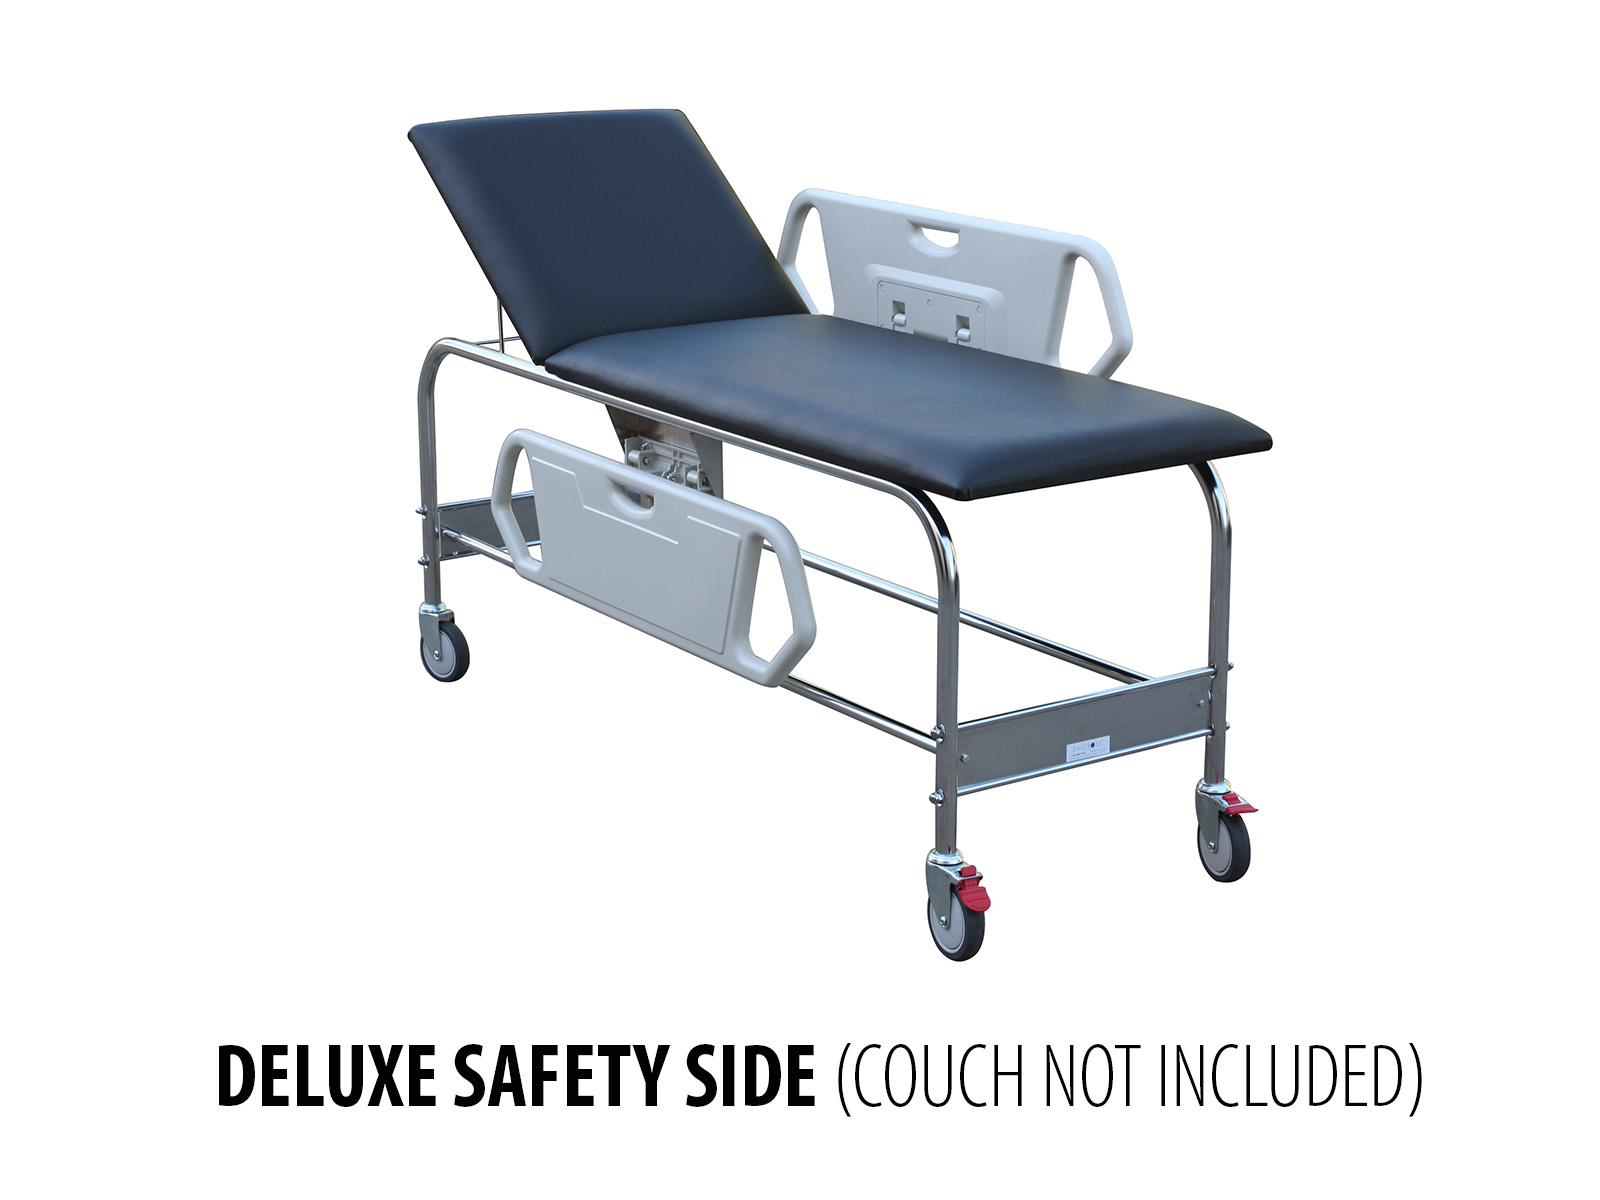 DELUXE SAFETY SIDES